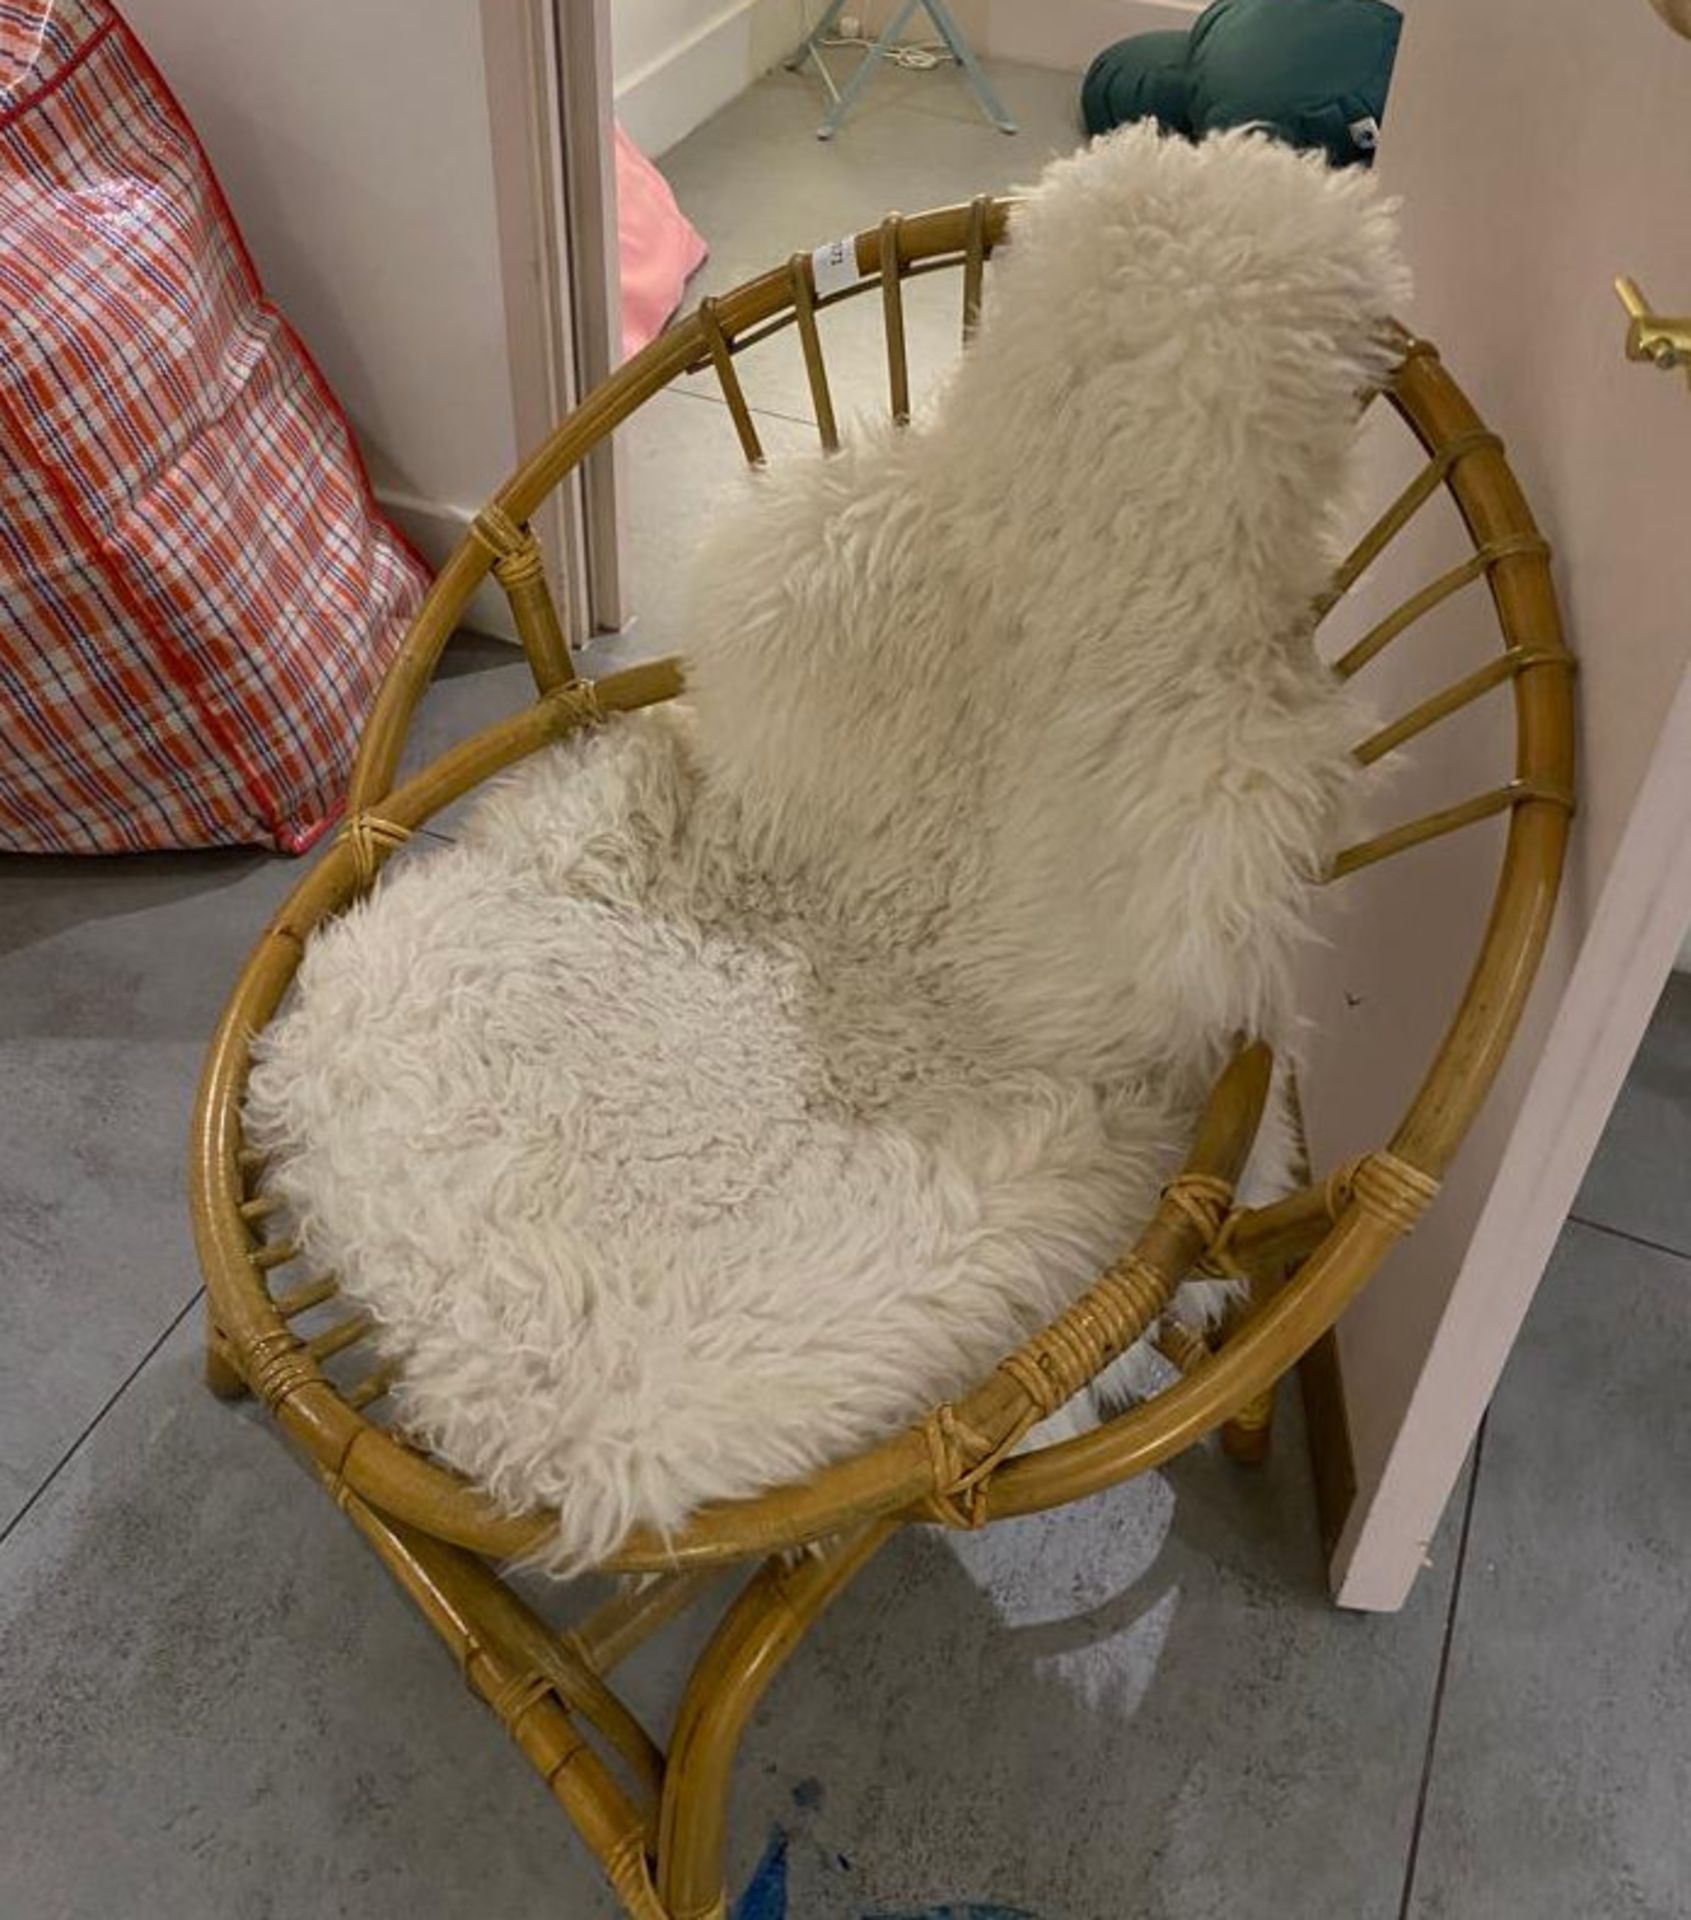 1 x Bamboo Chair With White Fluffy Cushions - CL776 - Ref: GB071 - Location: London W1WFrom a - Image 2 of 2